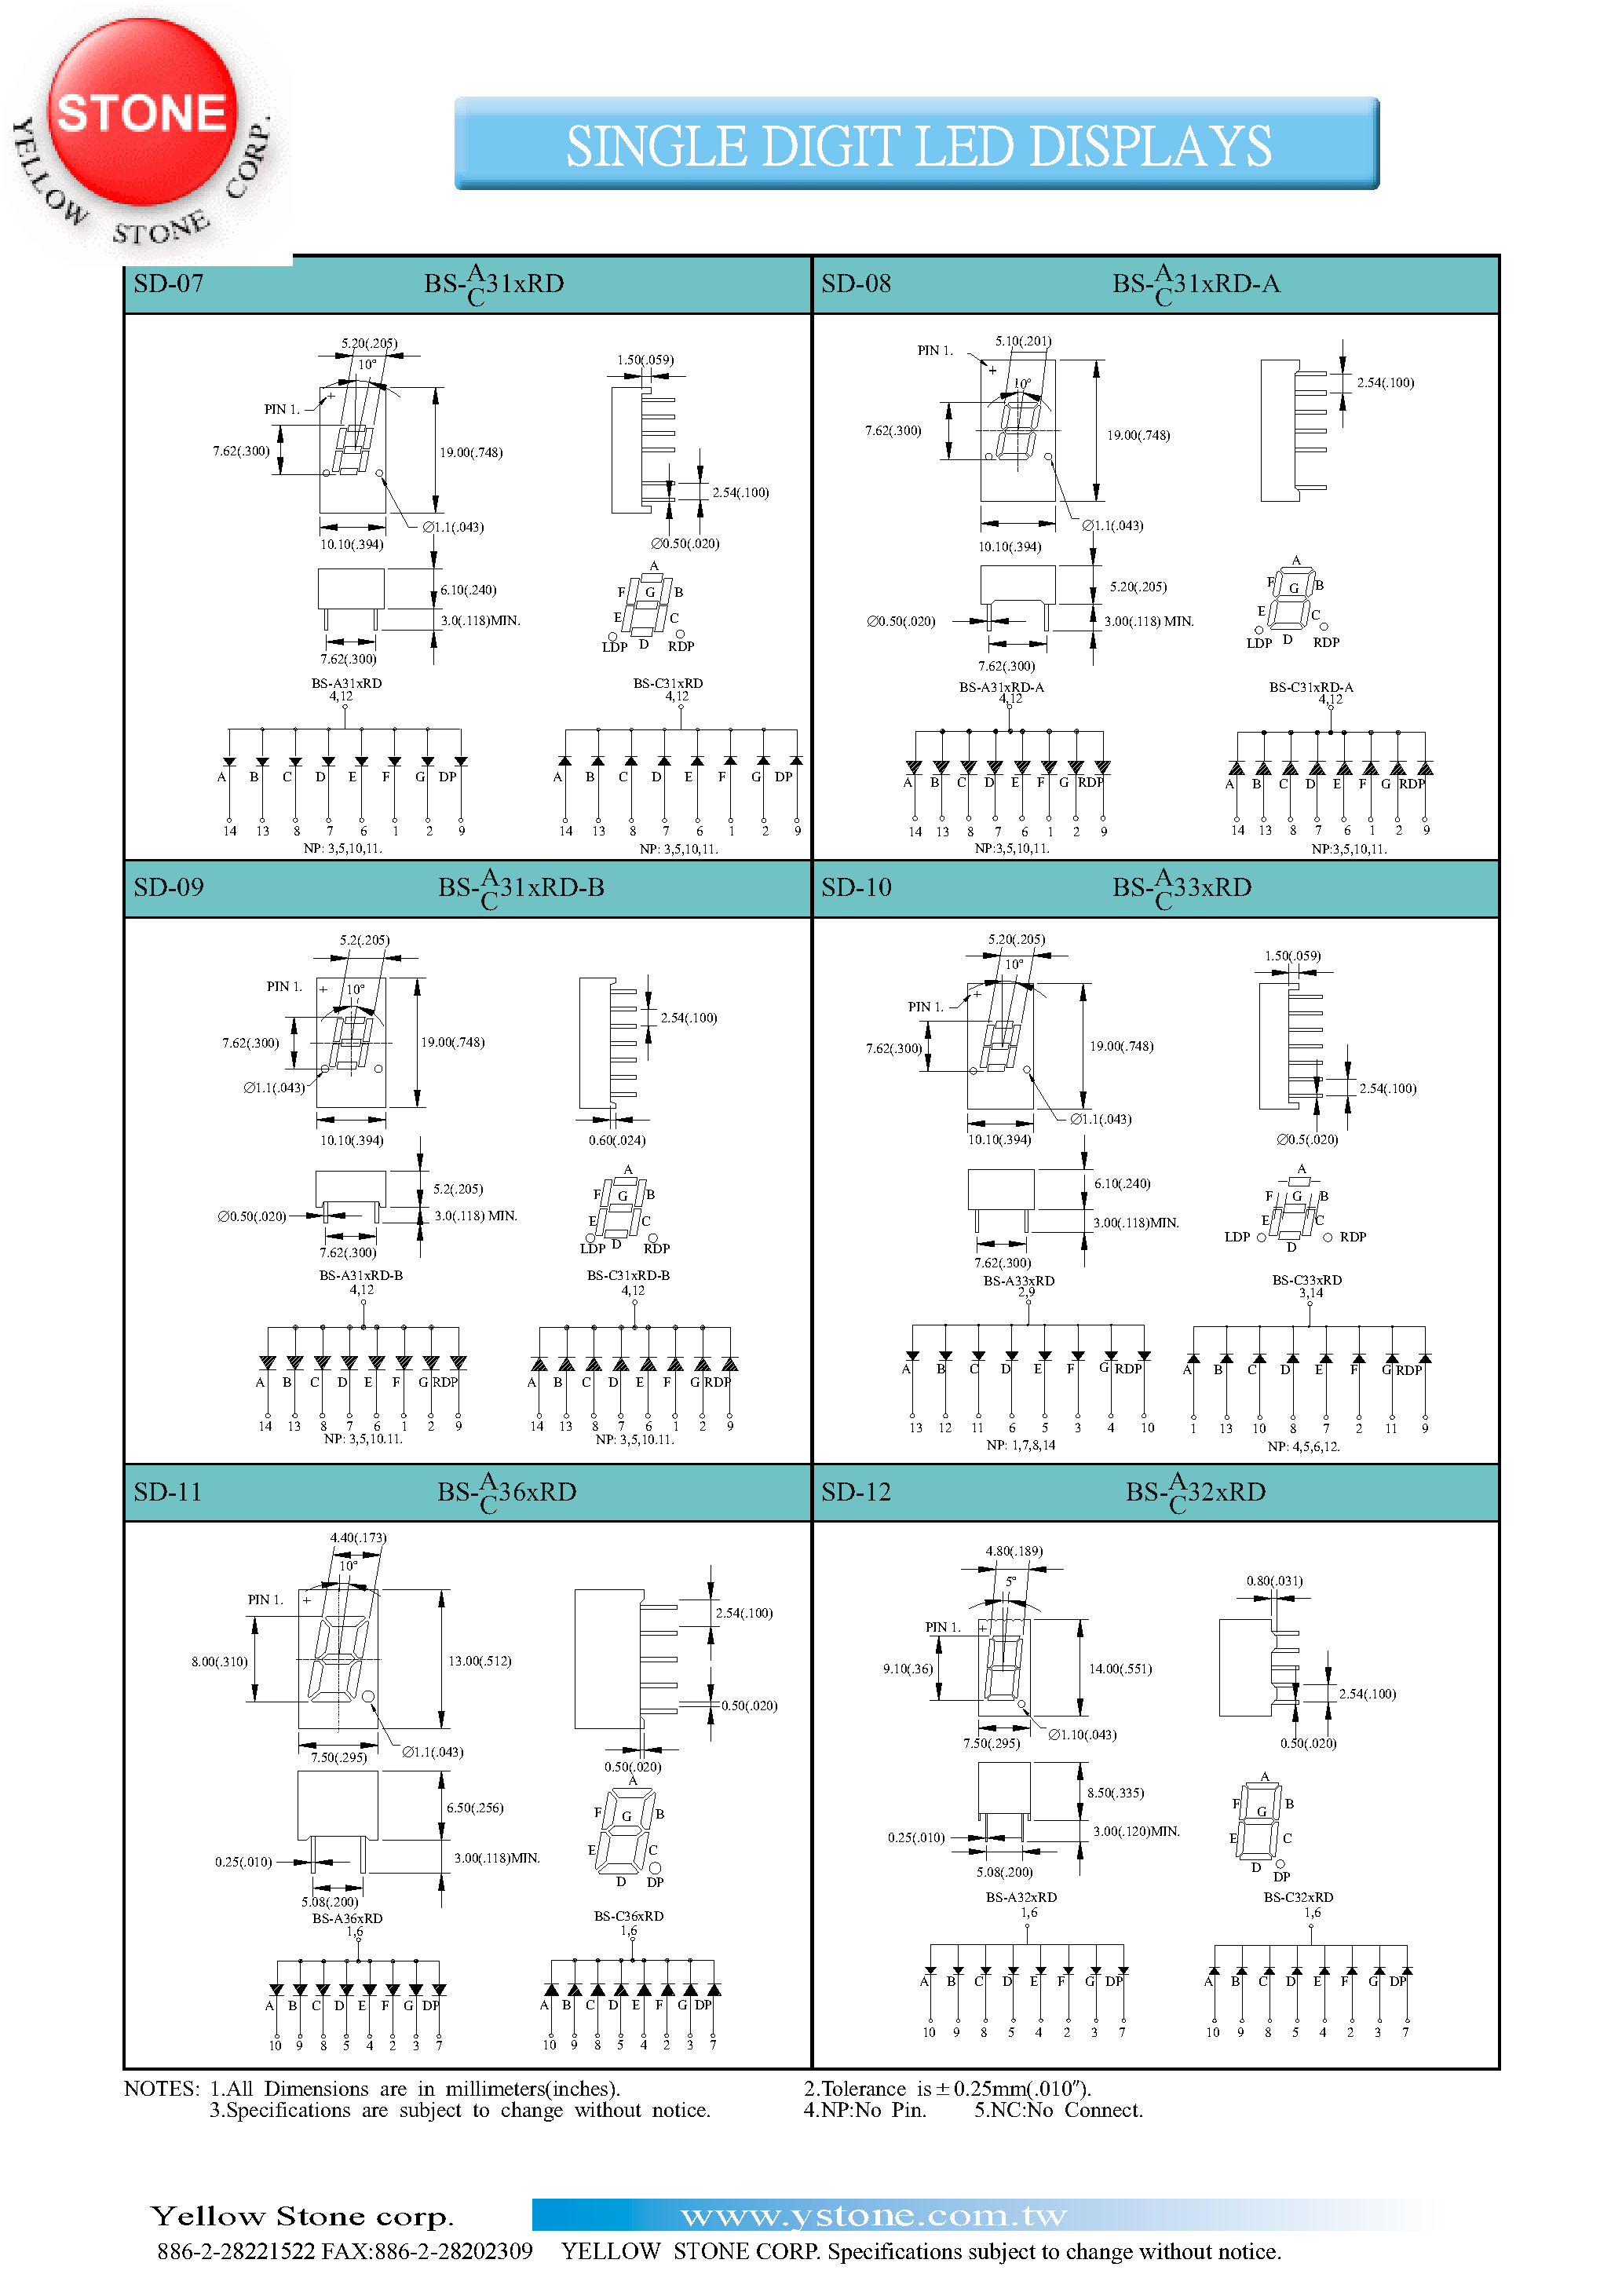 Datasheet BS-A31DRD-B - SINGLE DIGIT LED DISPLAYS page 2